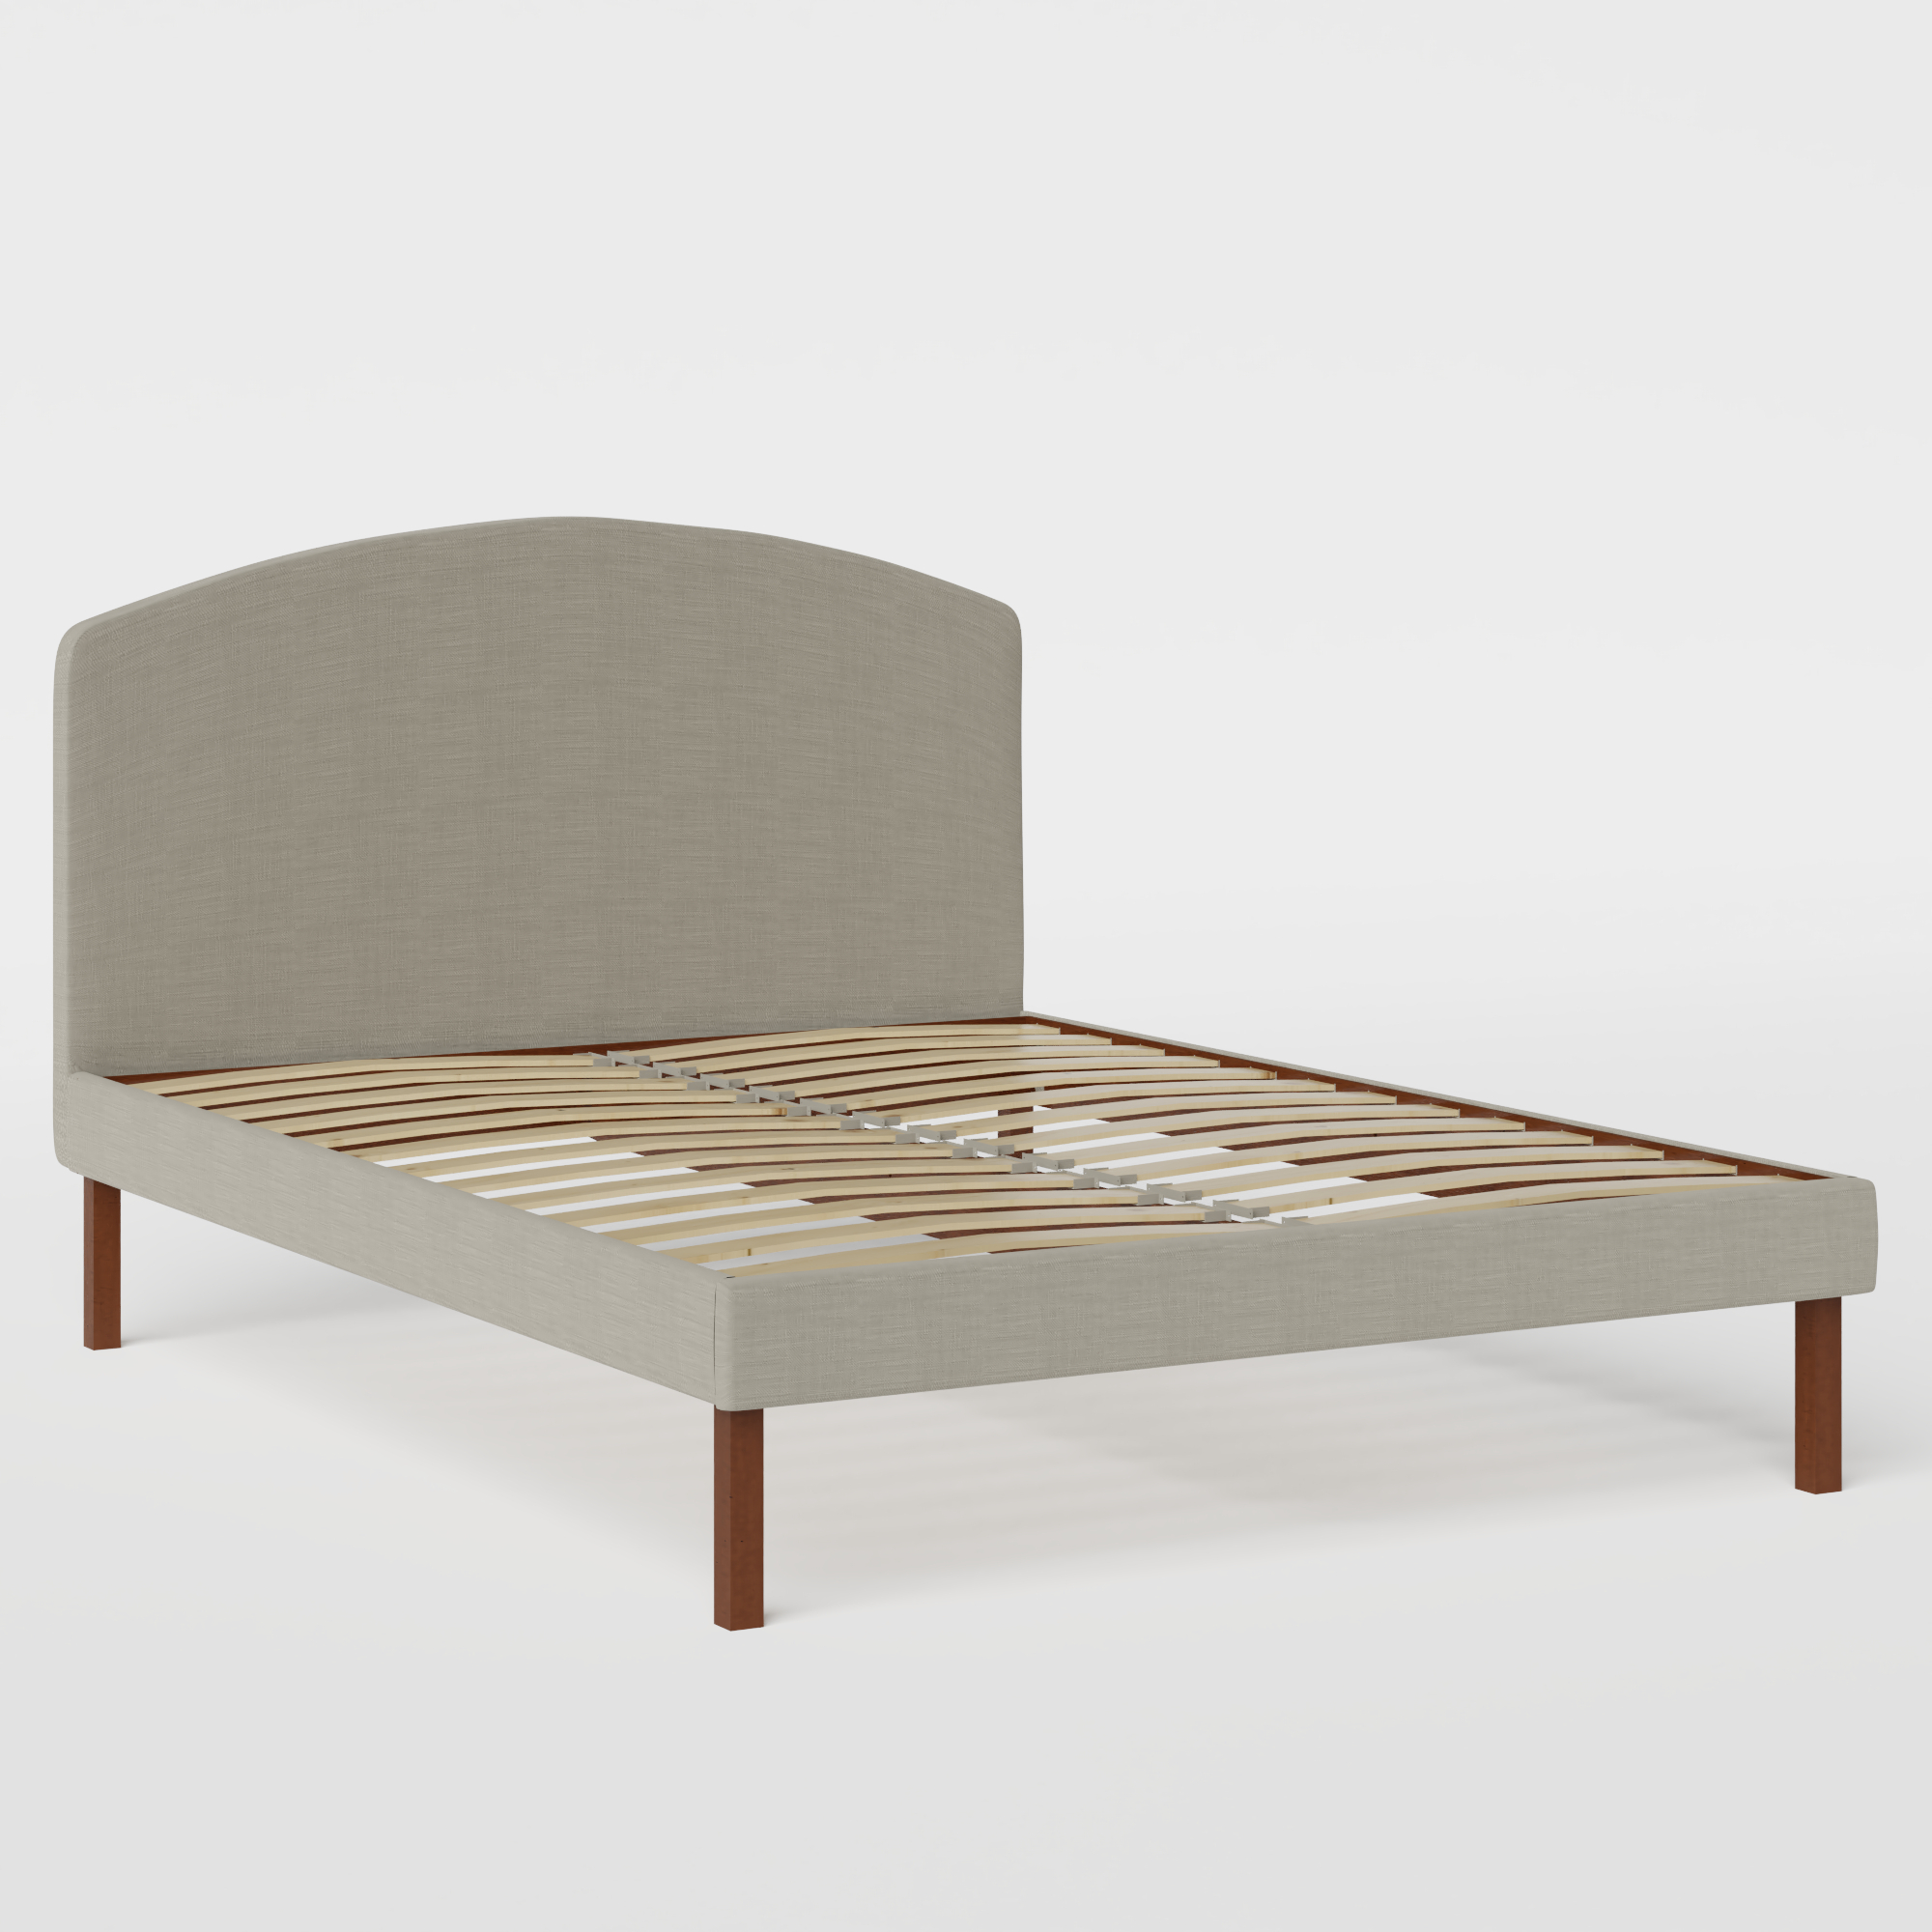 Okawa Upholstered upholstered bed in grey fabric